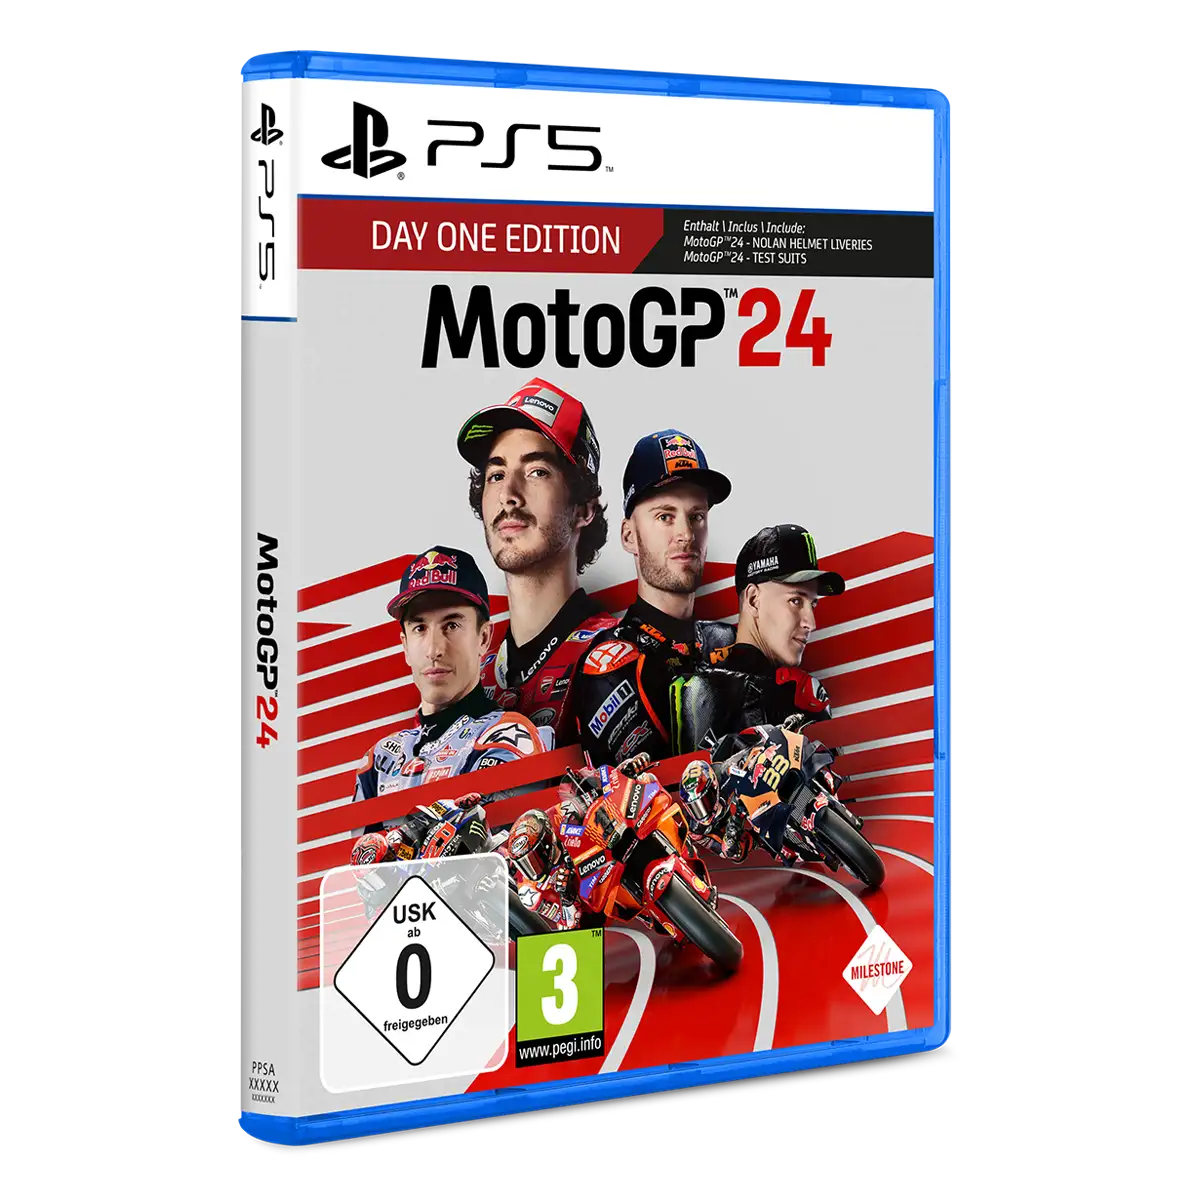 MotoGP 24 Day One Edition (PS5) Image 2